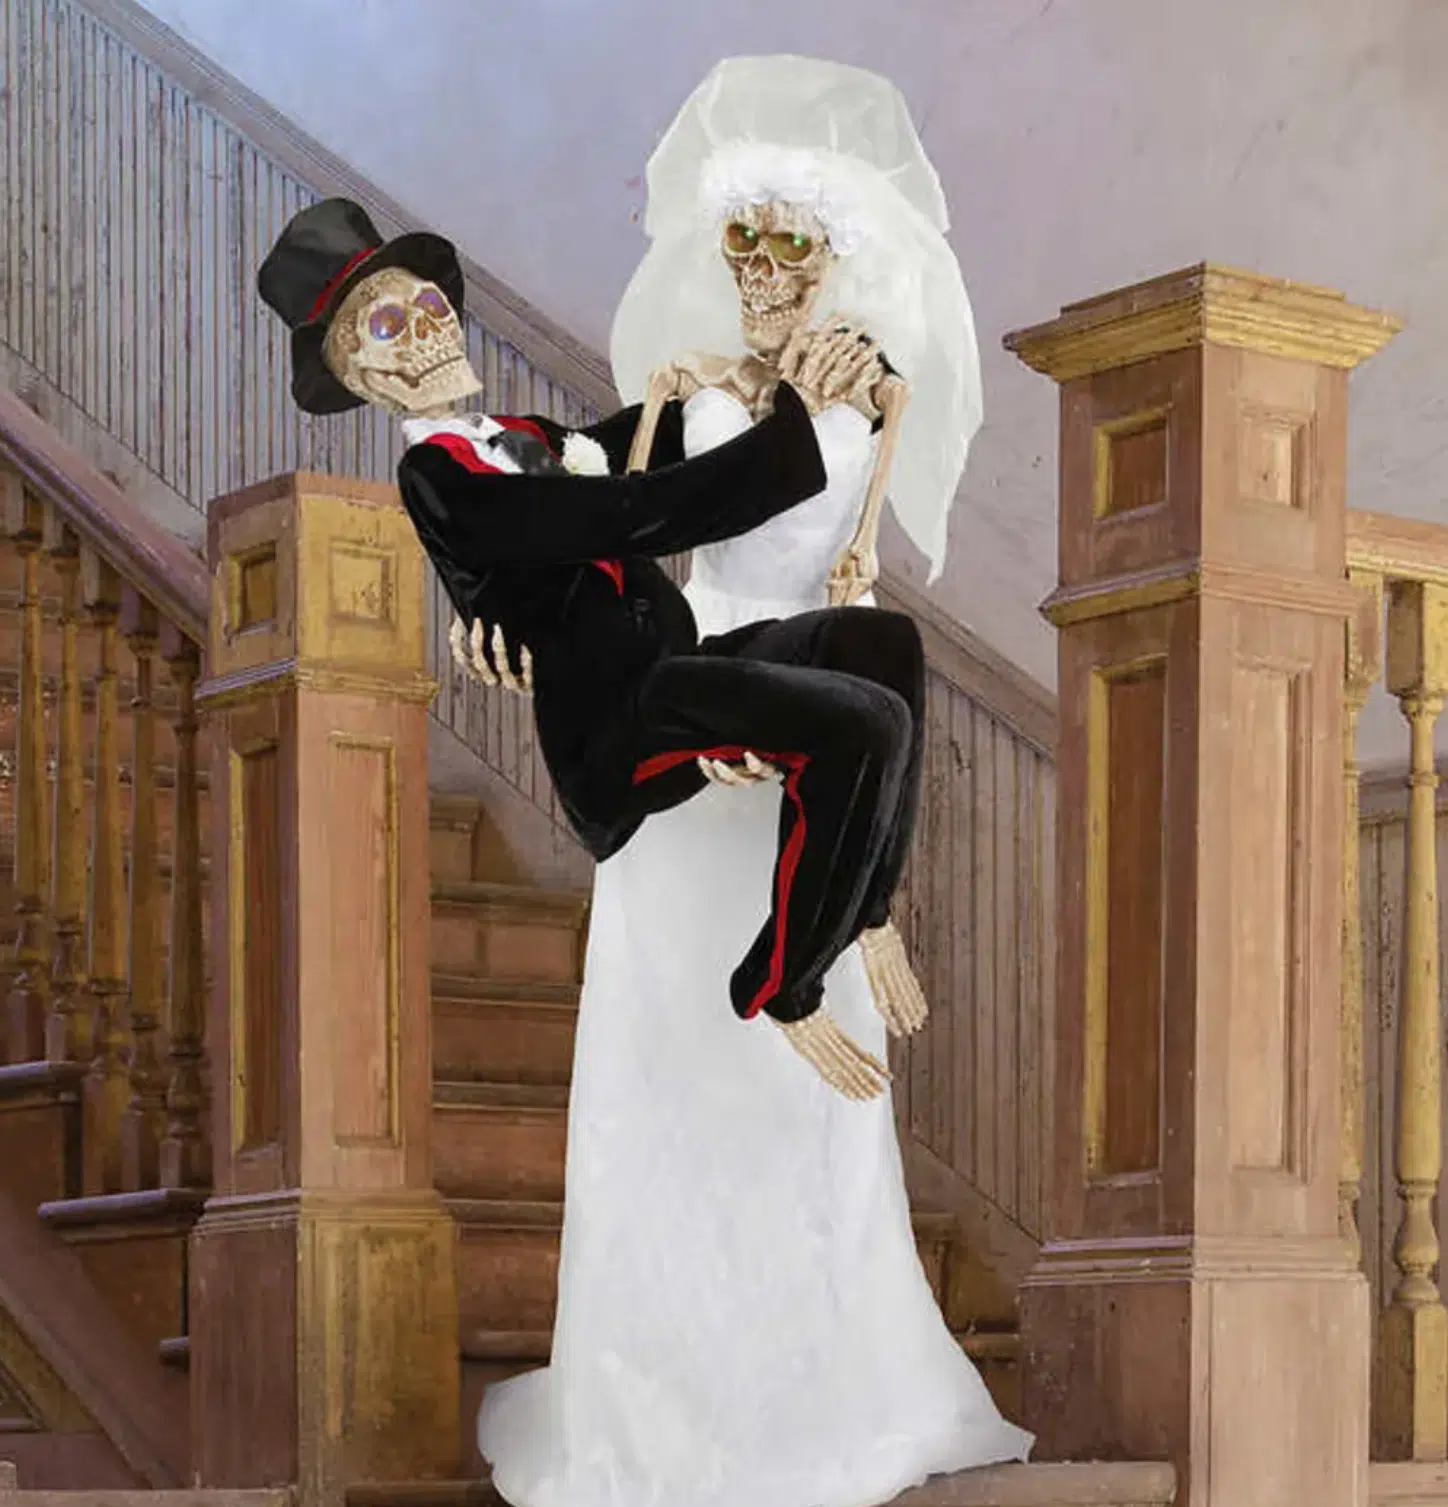 Are Costco's Dancing Skeleton Bride and Groom the New Home Depot Skeleton?